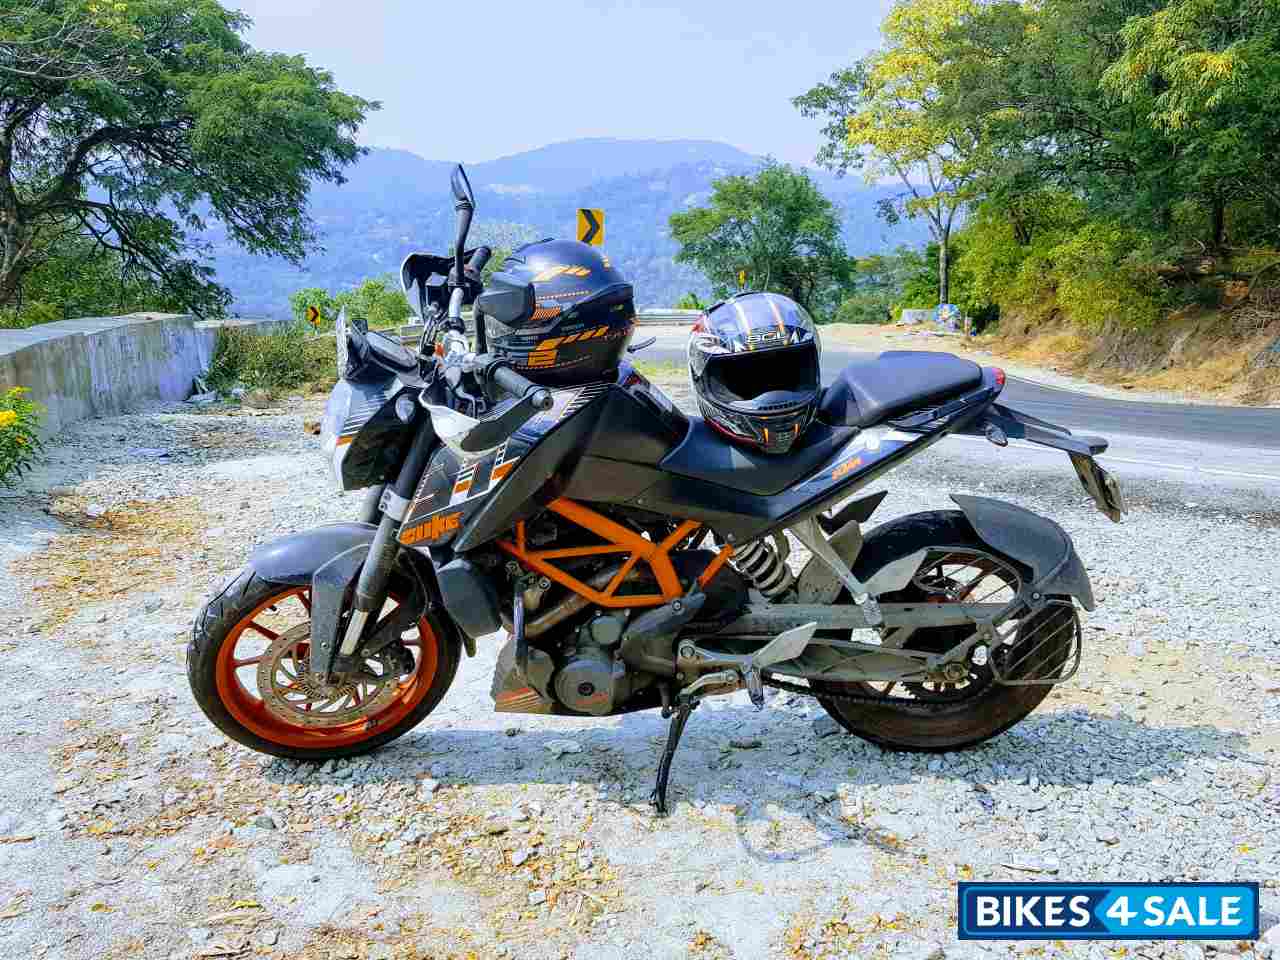 Used 2016 model KTM Duke 390 for sale in Bangalore. ID ...